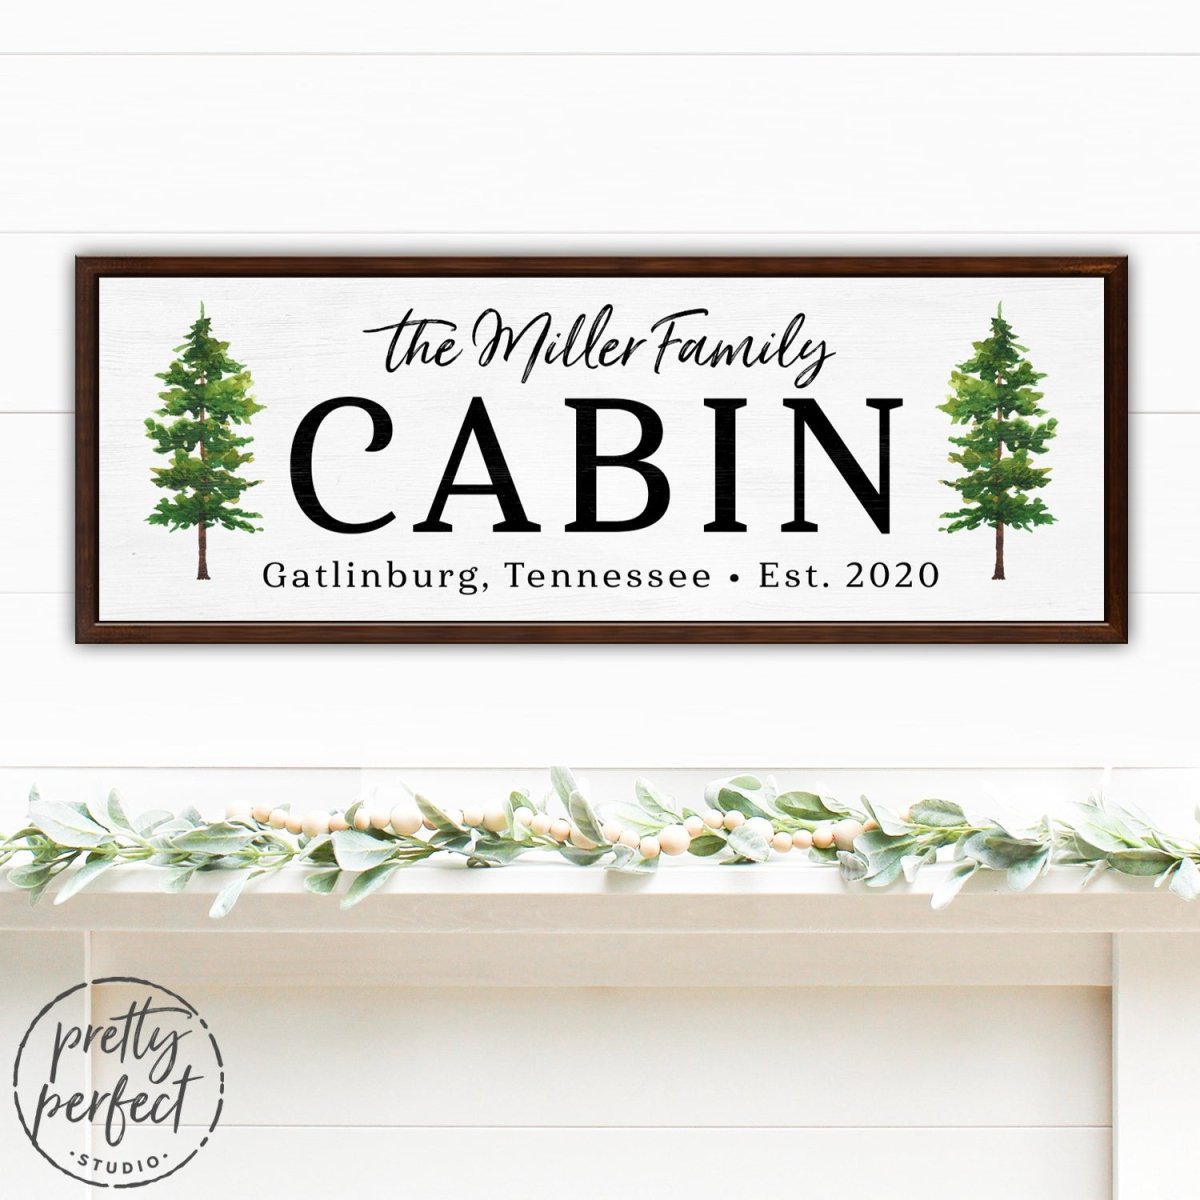 Personalized Family Cabin Sign Hanging in Home - Pretty Perfect Studio